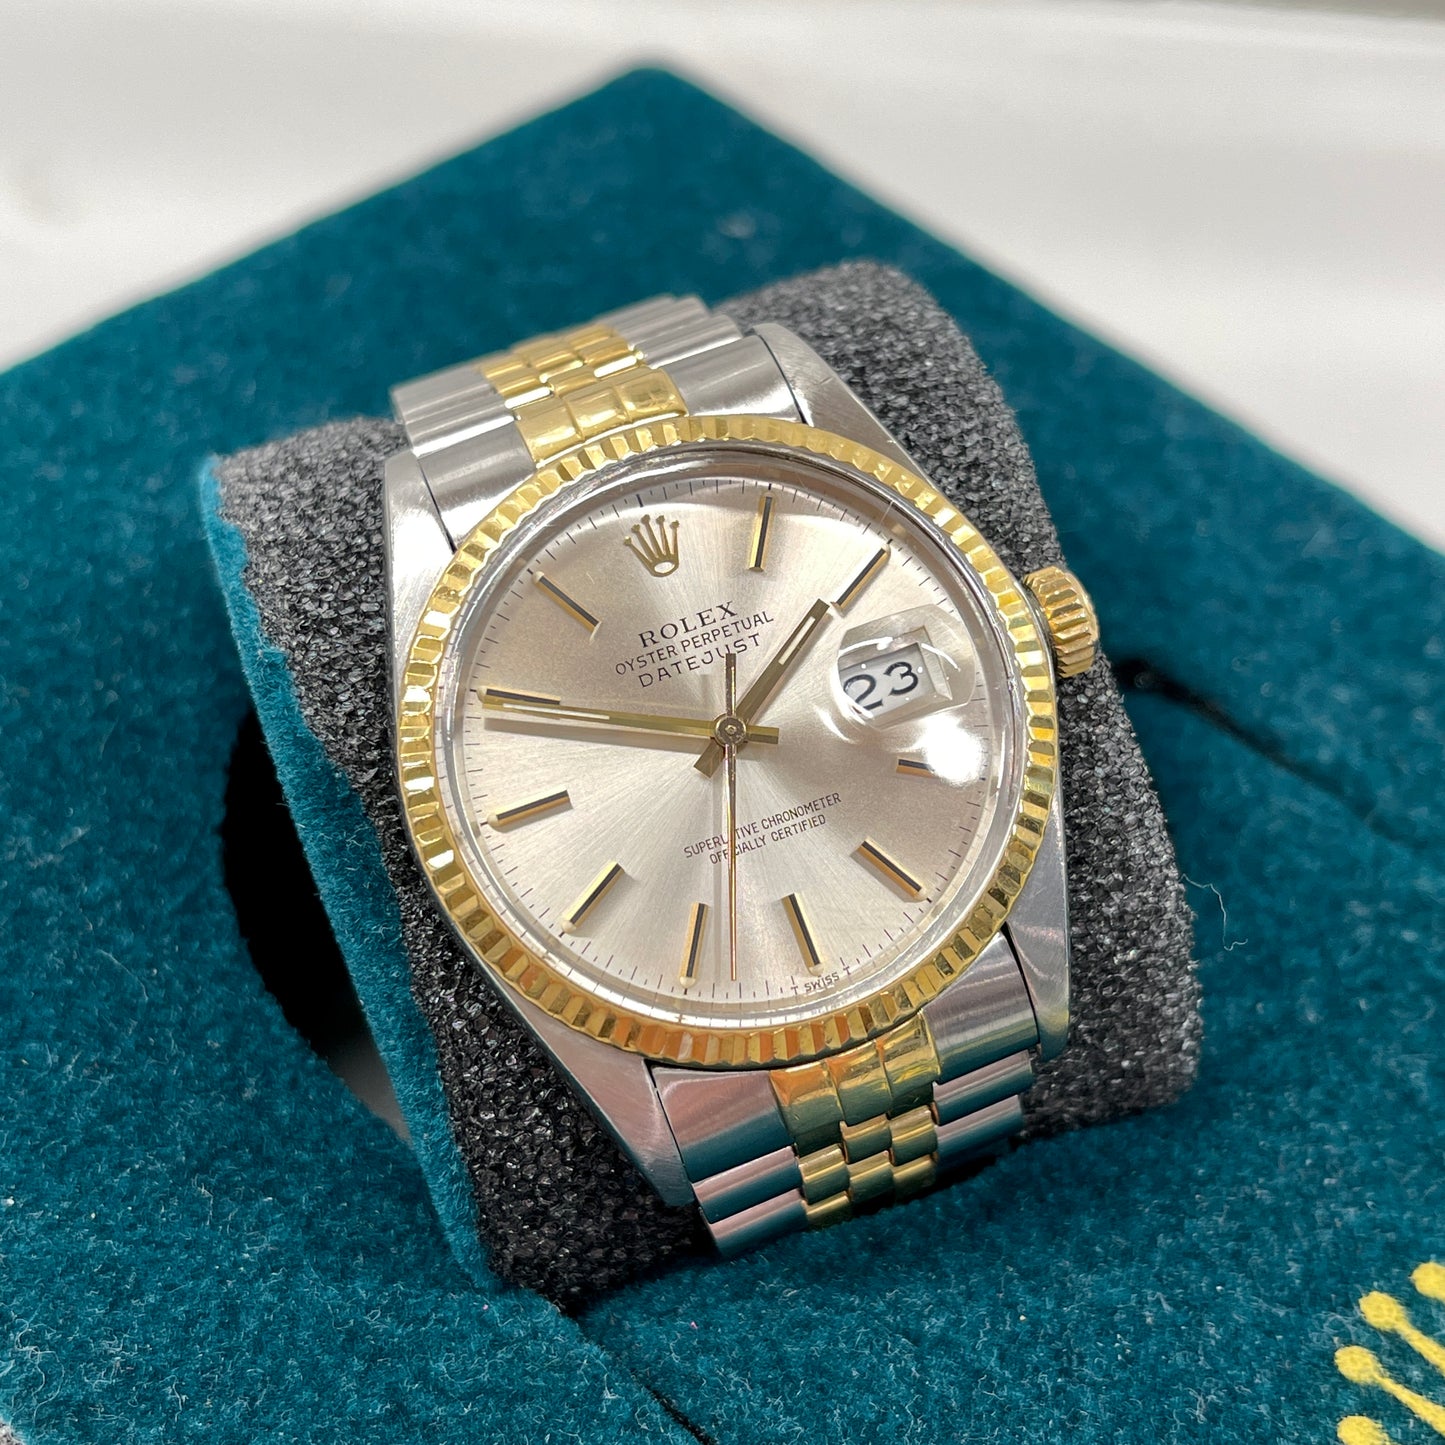 1985 Vintage Rolex Datejust 16013 Steel Gold Two Tone Jubilee Cal 3035 Automatic Wristwatch - Hashtag Watch Company